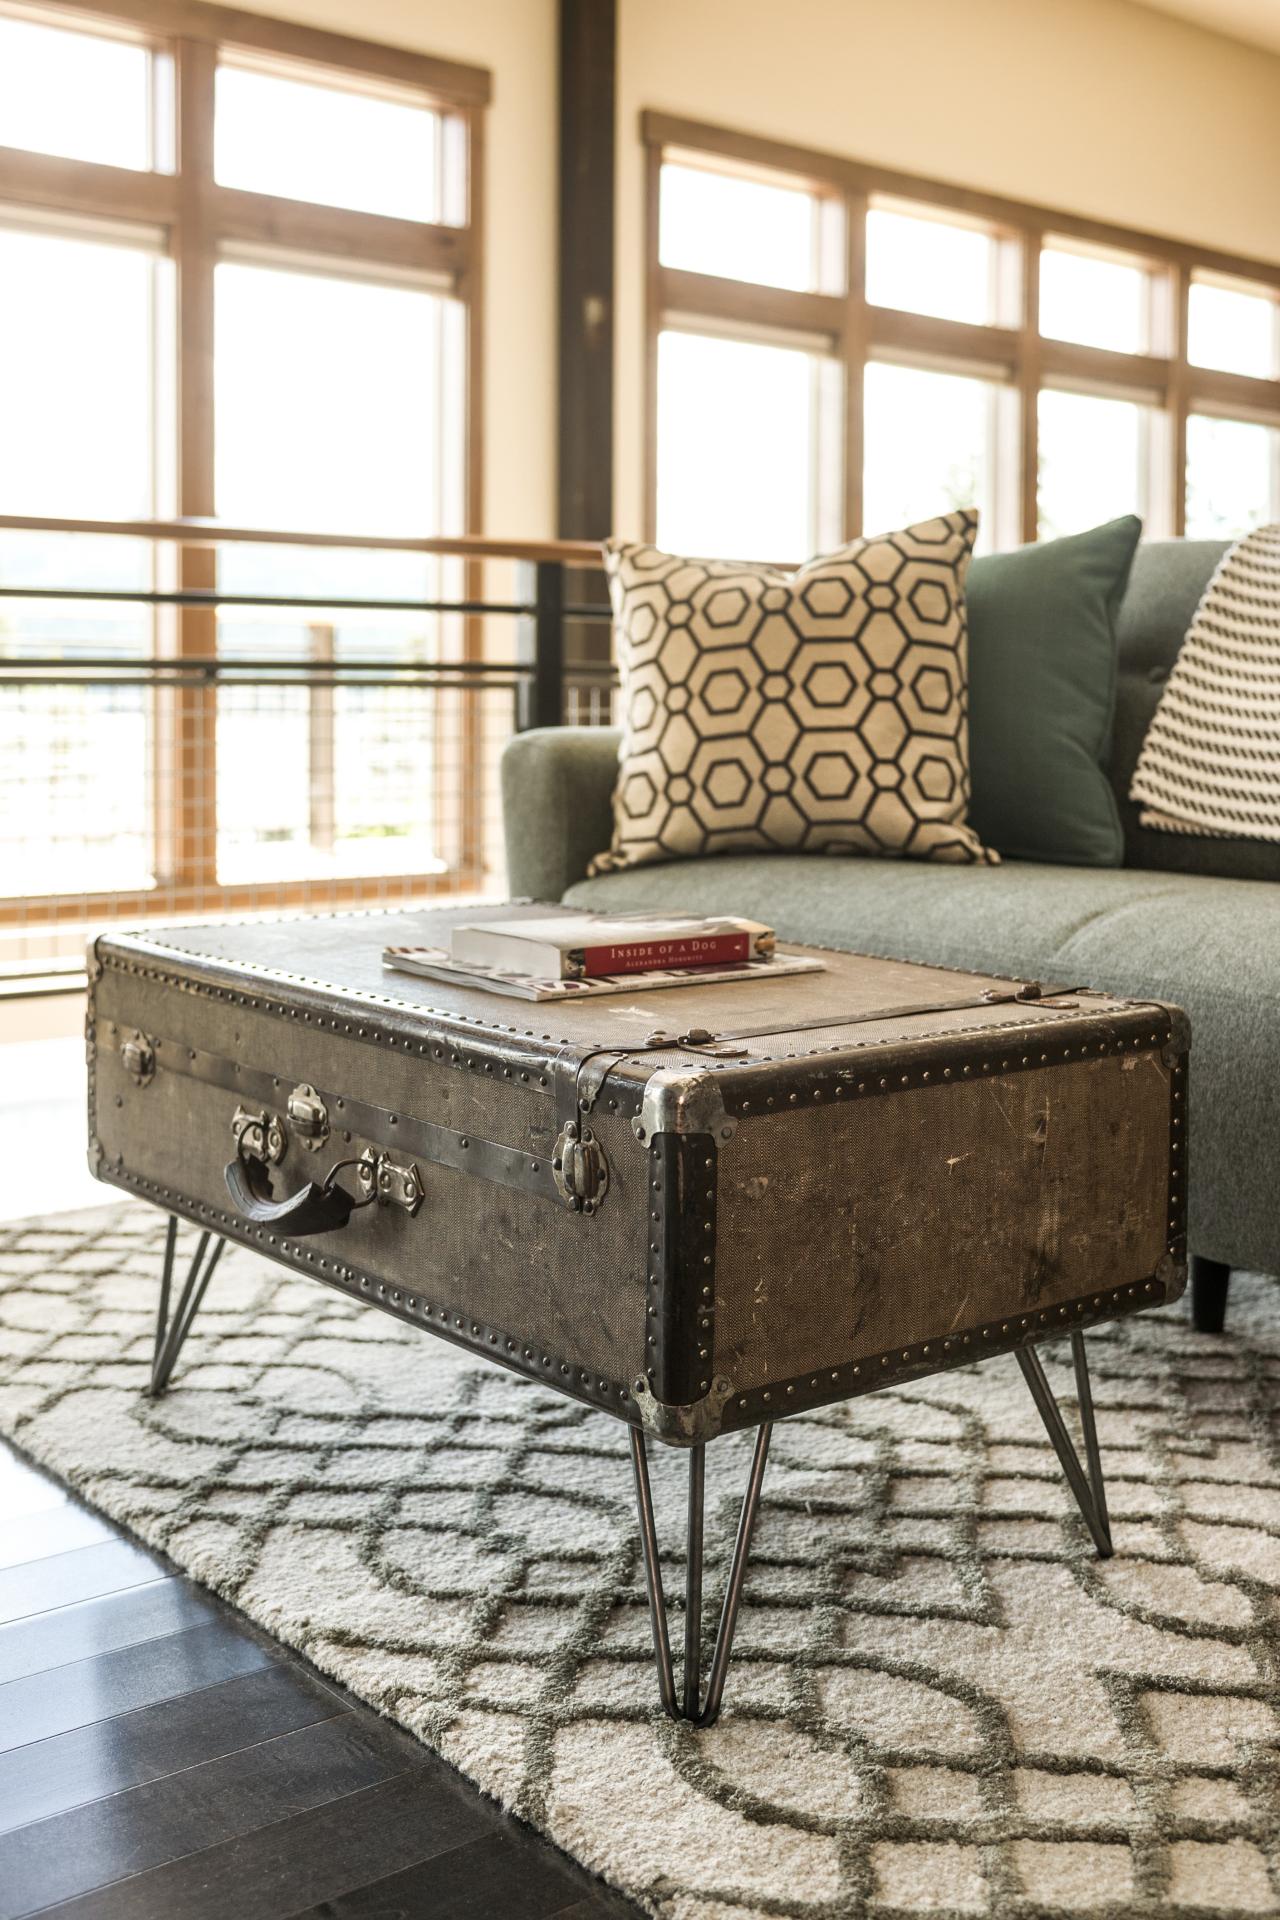 How To Make A Suitcase Coffee Table, How To Turn An Old Trunk Into A Coffee Table